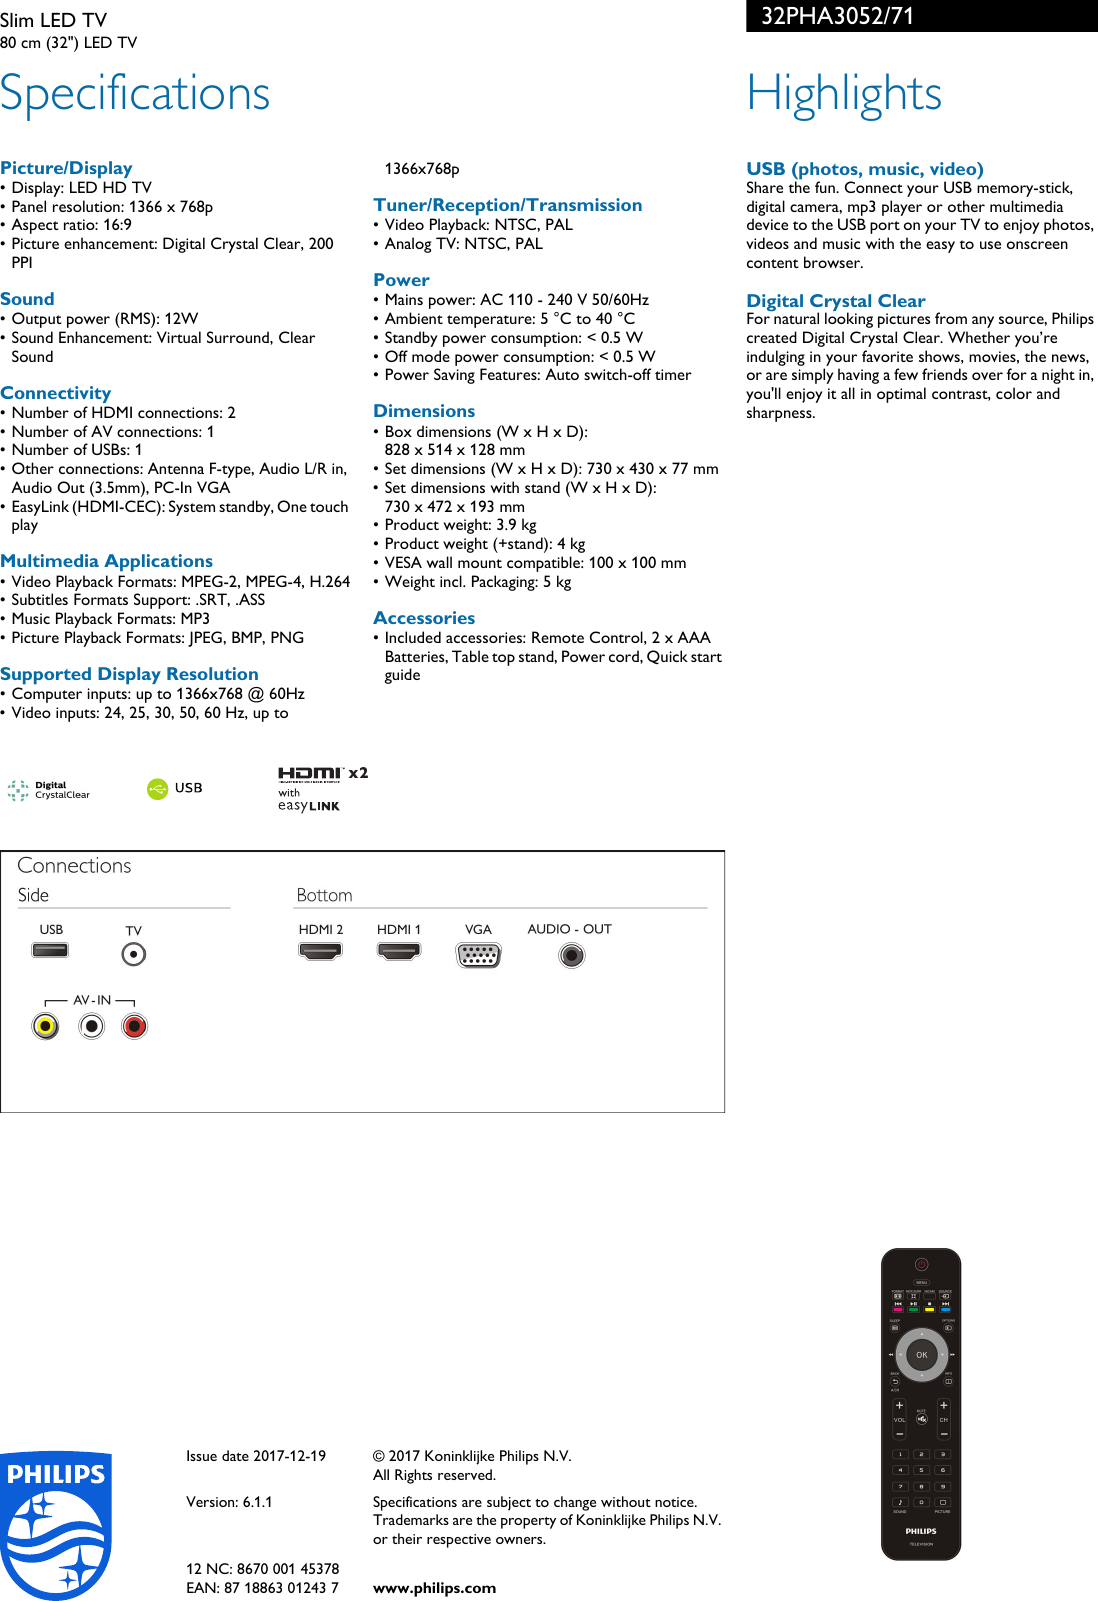 Page 2 of 2 - Philips 32PHA3052/71 Slim LED TV With Digital Crystal Clear User Manual Leaflet 32pha3052 71 Pss Engph